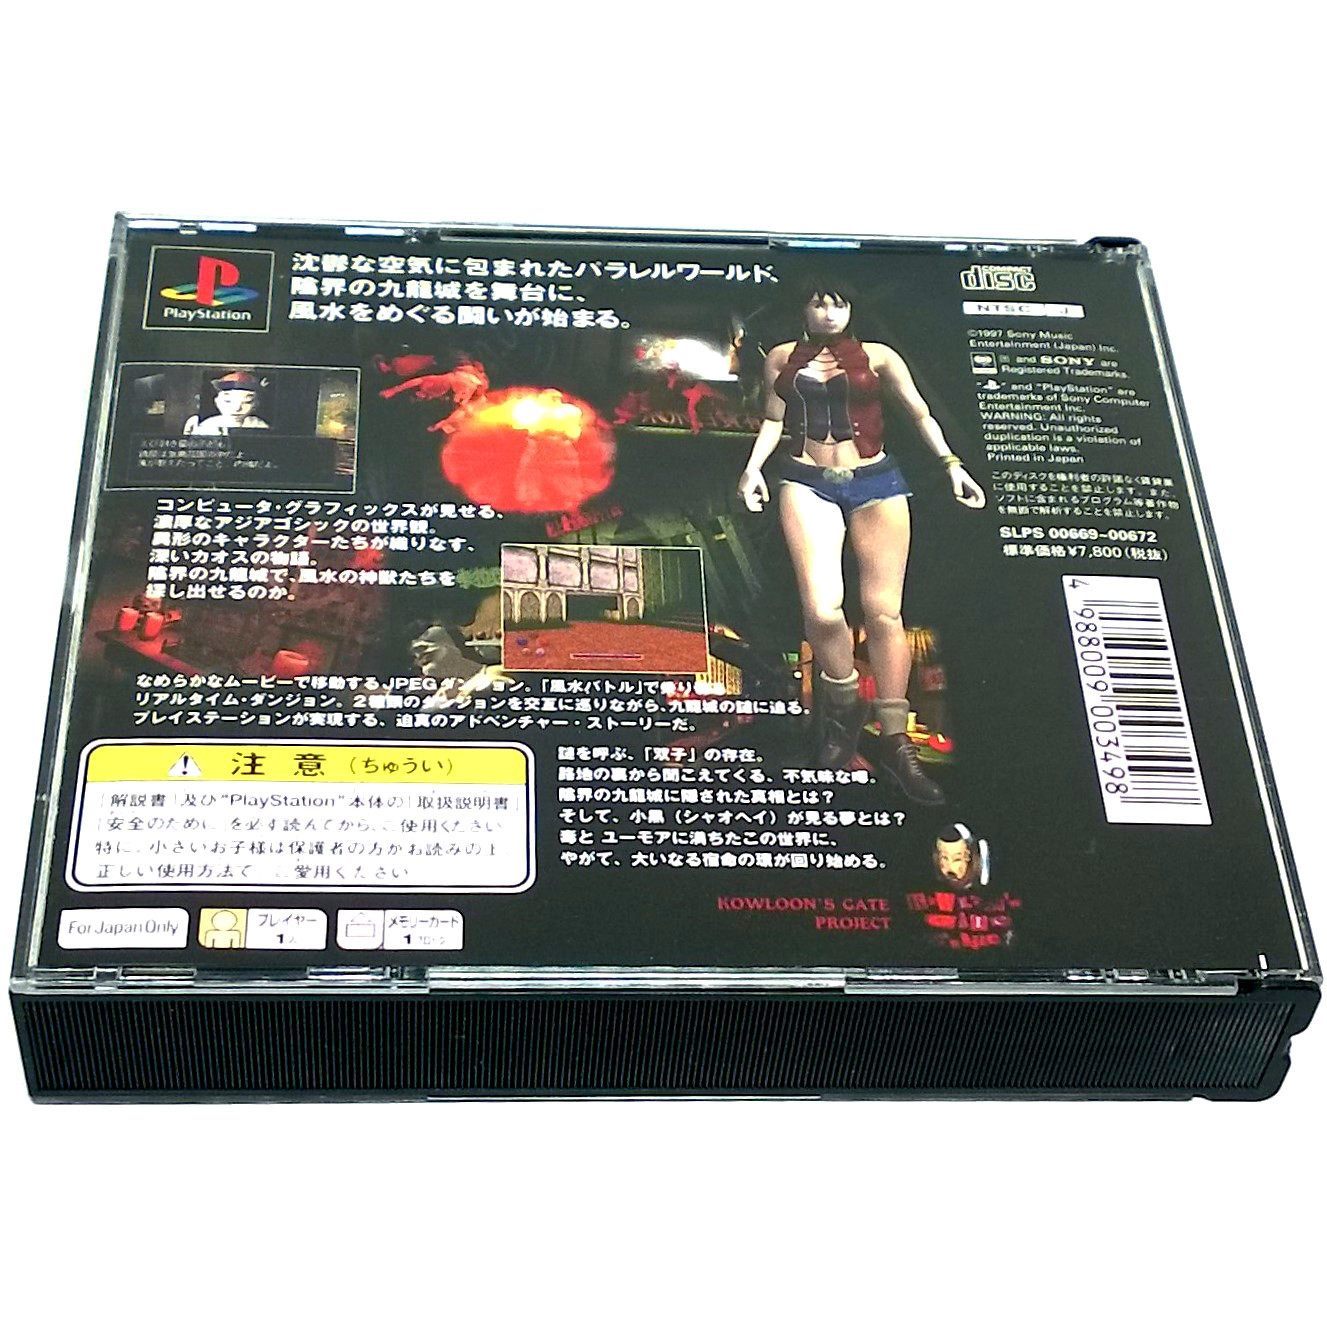 Kowloon's Gate for PlayStation (Import) - Back of case